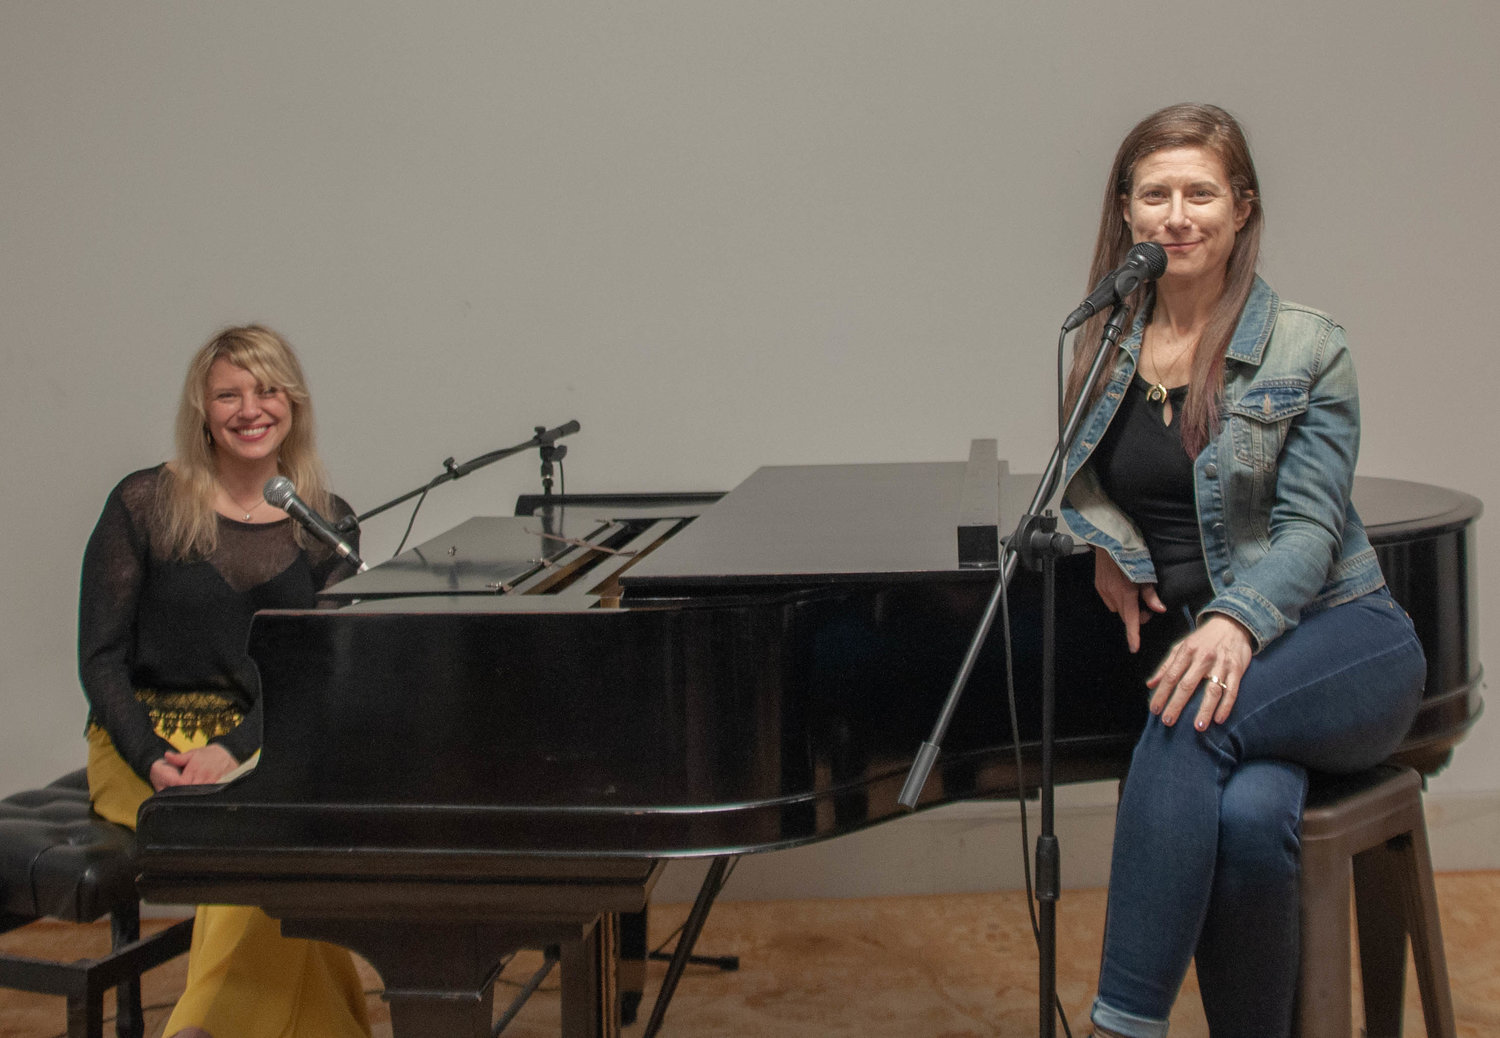 Singer-songwriter Andrea Wittgens, left, debuted her newest work in progress, titled "Songs and Visions," with Lena Kaminsky on vocals. They performed at the penultimate Salon Series DVAA presentation in Narrowsburg, NY last weekend.